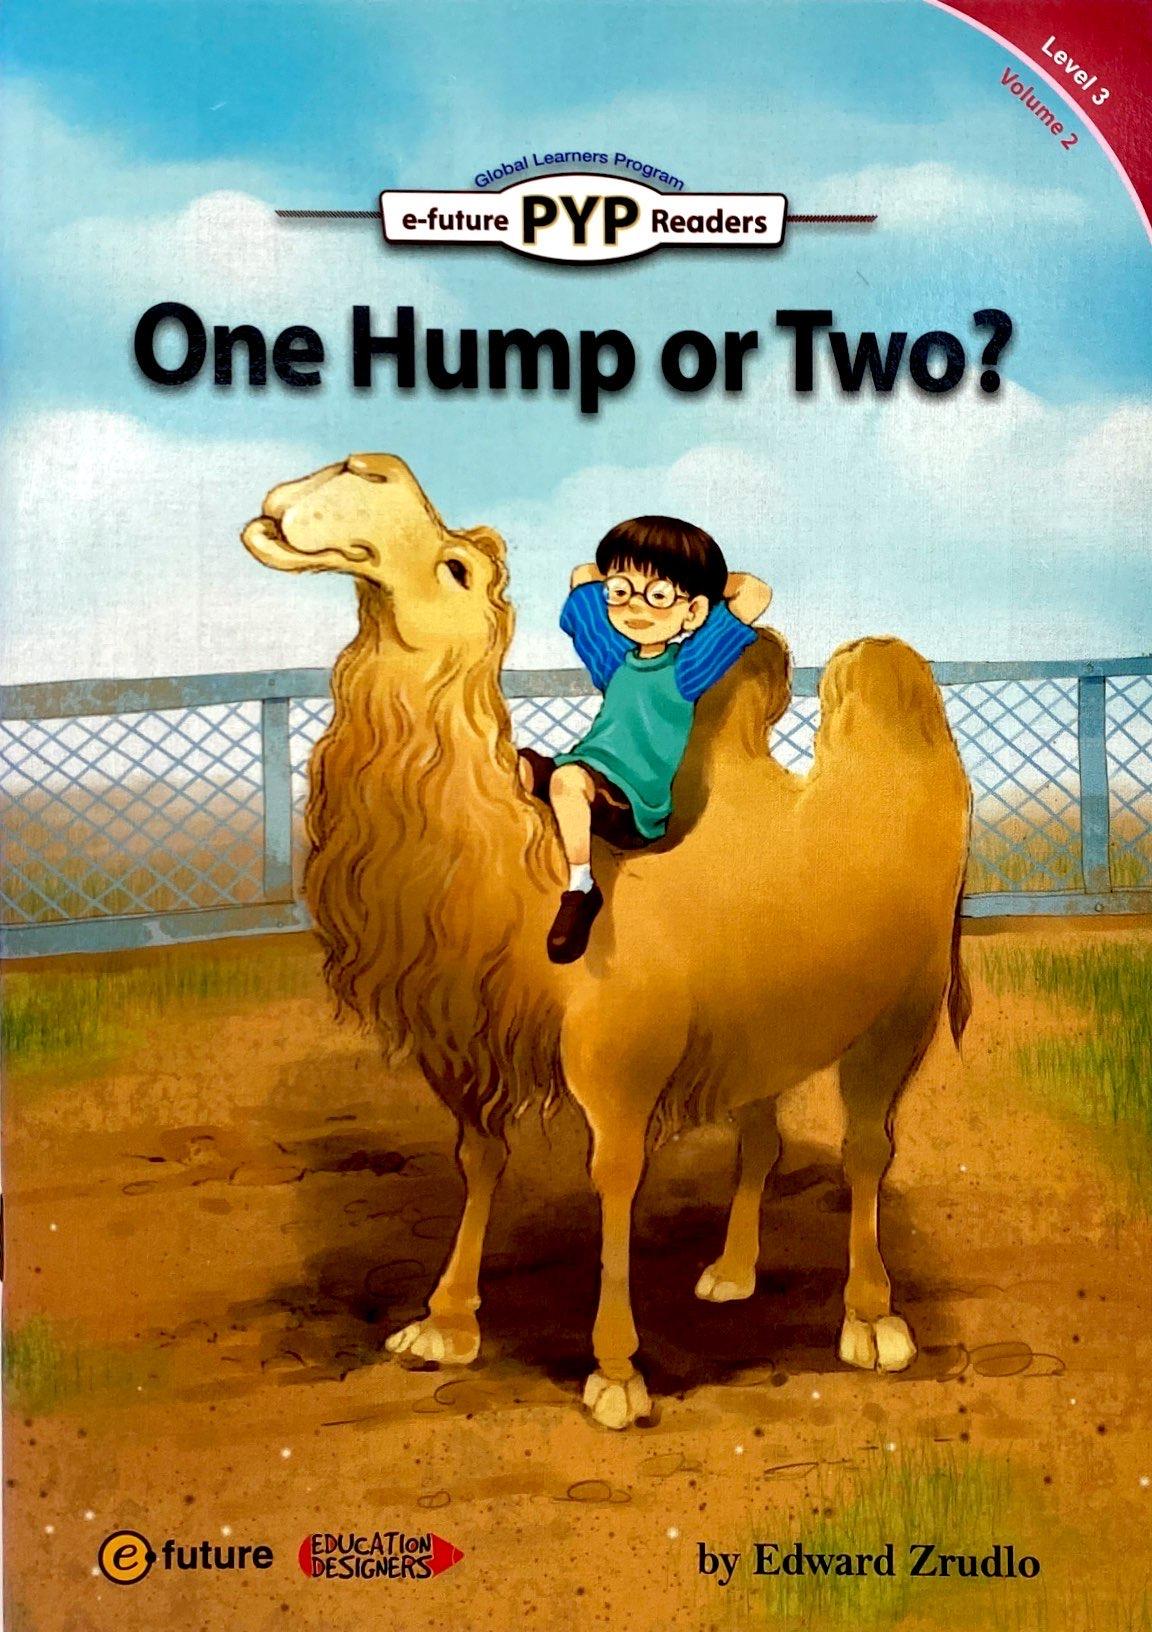 PYP Readers. 3-02/One Hump or Two?